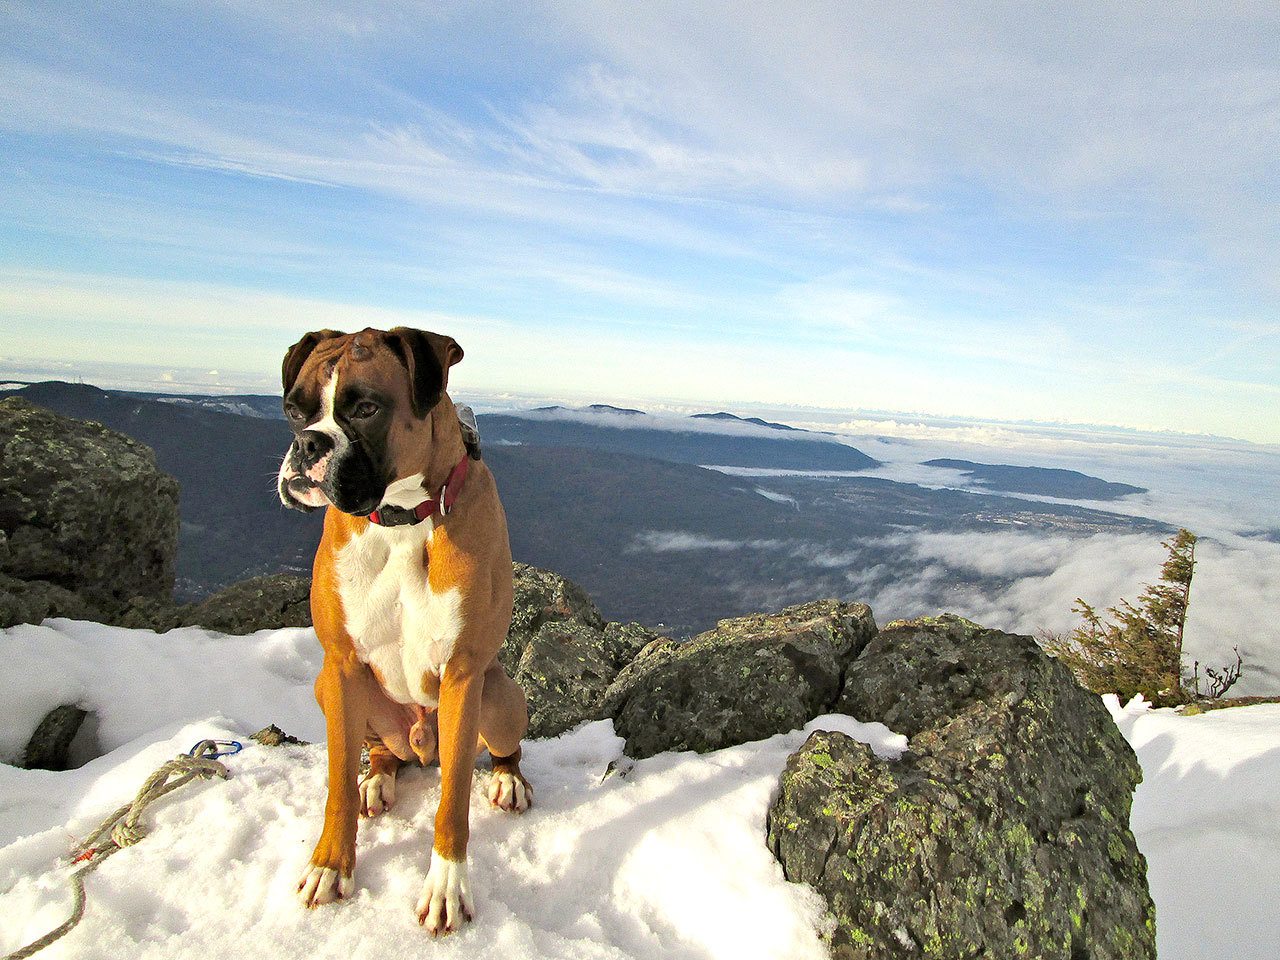 Courtesy Photo                                Yogi, a 6-year-old Boxer belonging to Cindy and Mike Gaudio of North Bend, was found four cold and stormy days after he got separated from his family on a hike to Mailbox Peak Dec. 30. He was found, tired and hungry, at the North Bend Fire Training Academy Jan. 2 and reunited with his family the same day.